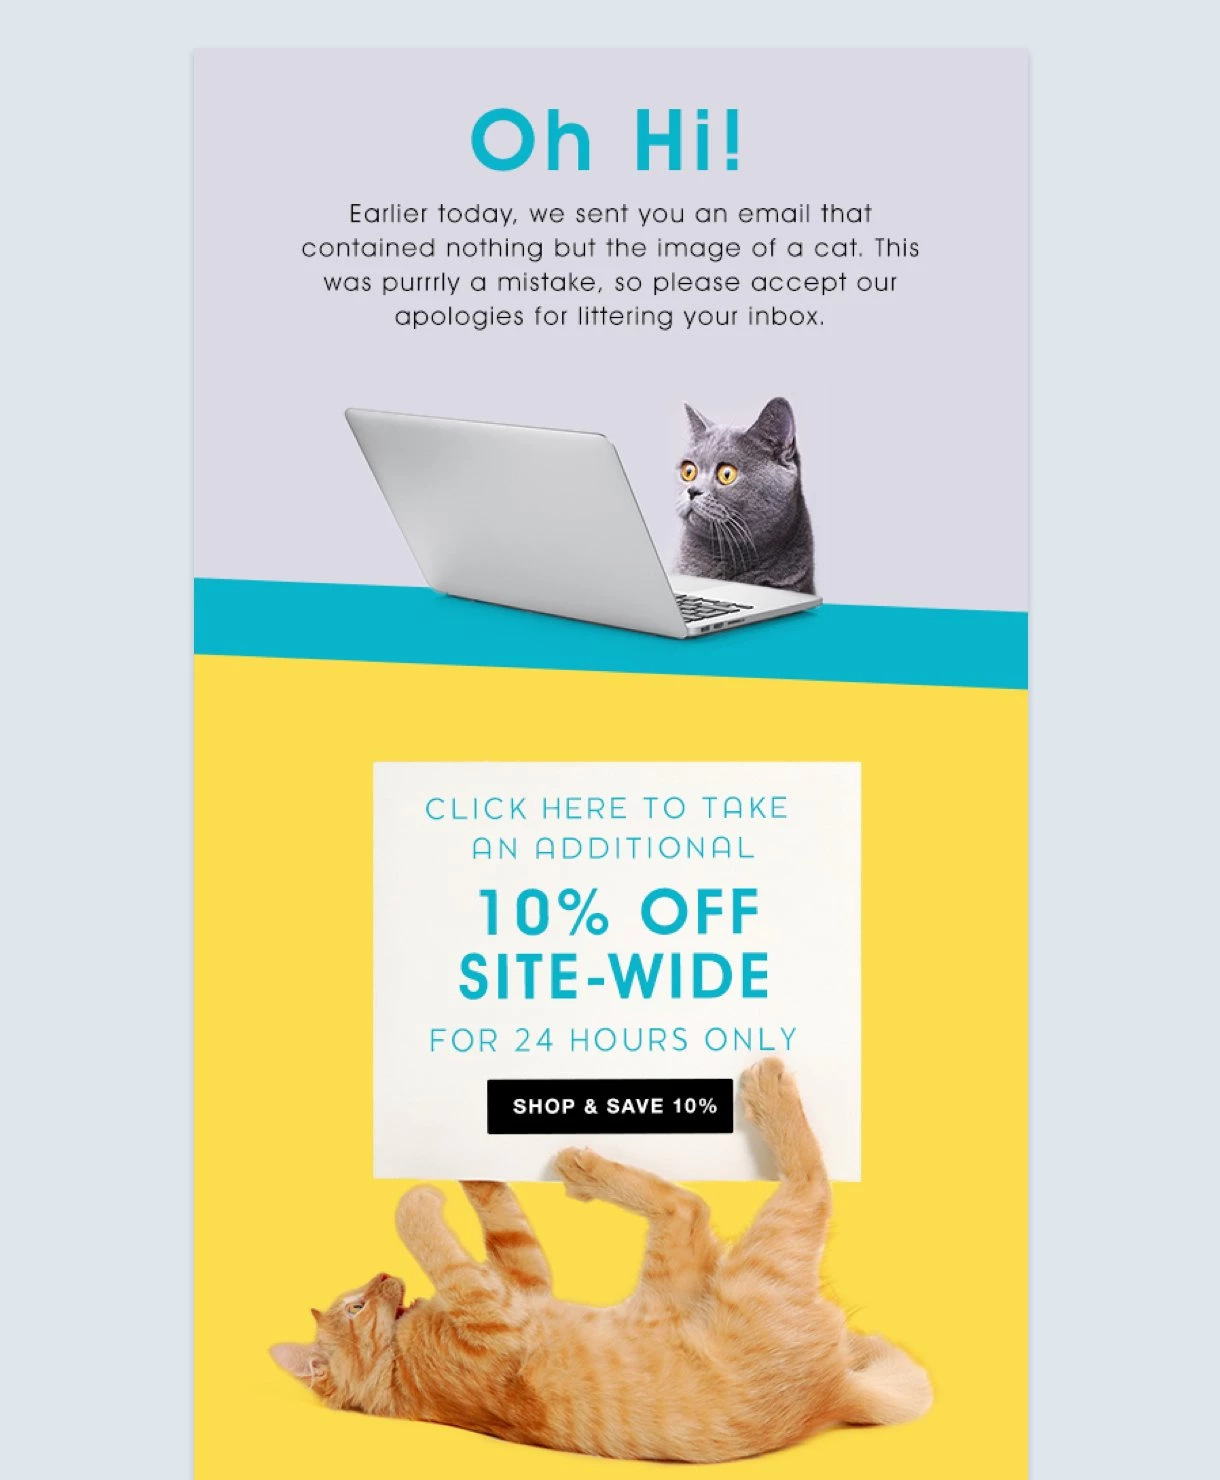 email marketing mistakes - funny apology email mistake example from fab